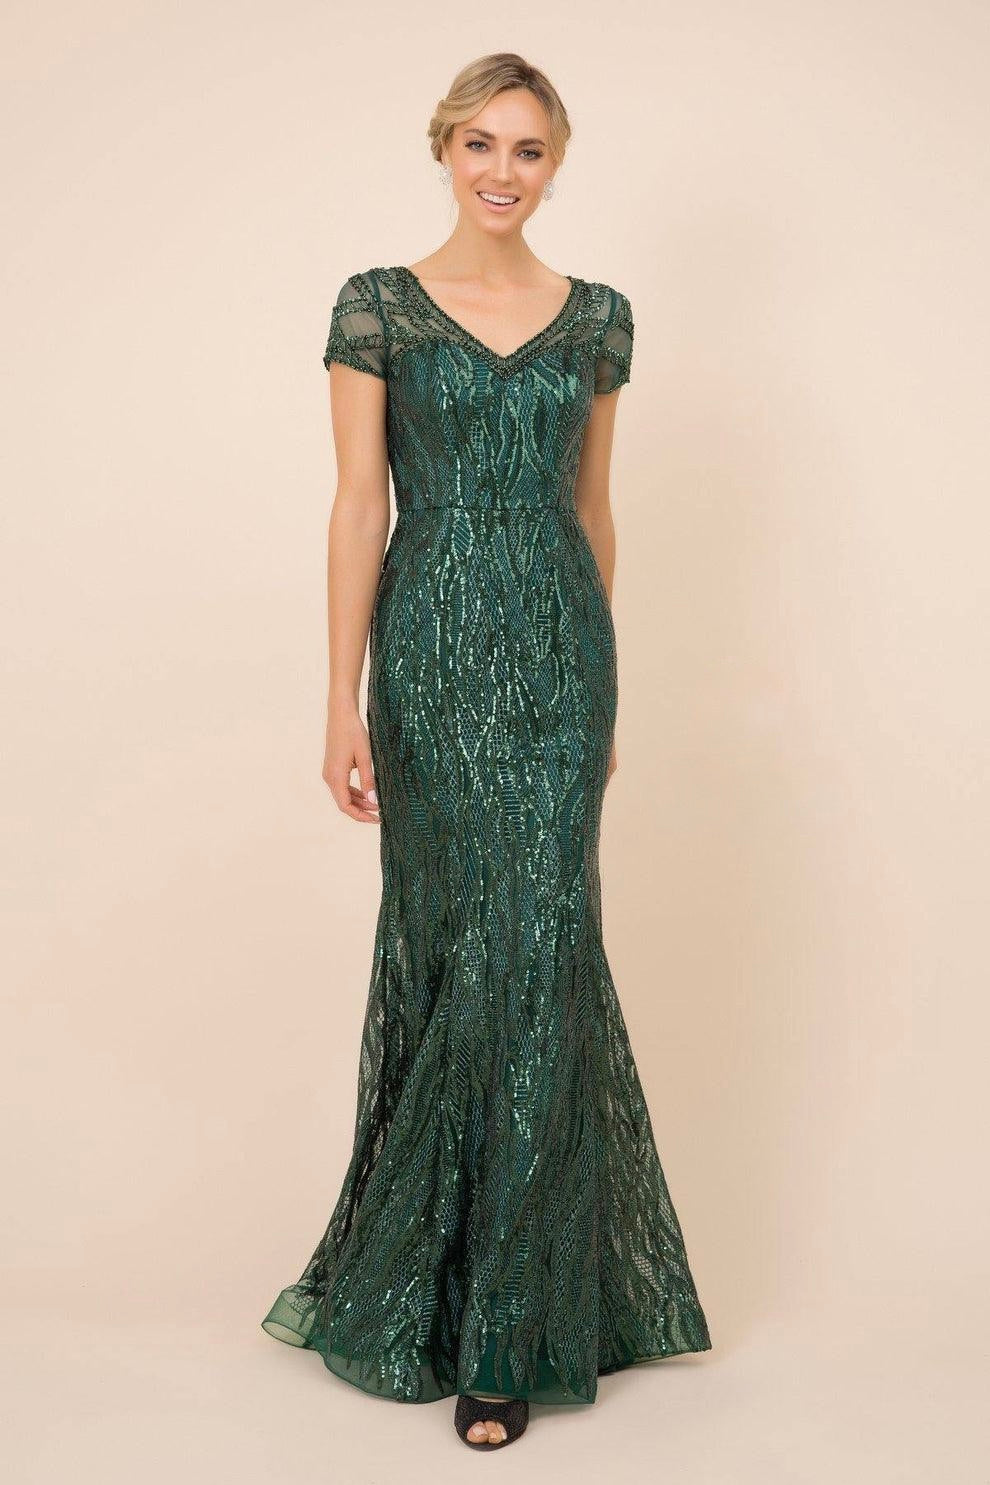 Nox Emerald Embroidered Sequin Evening Gown